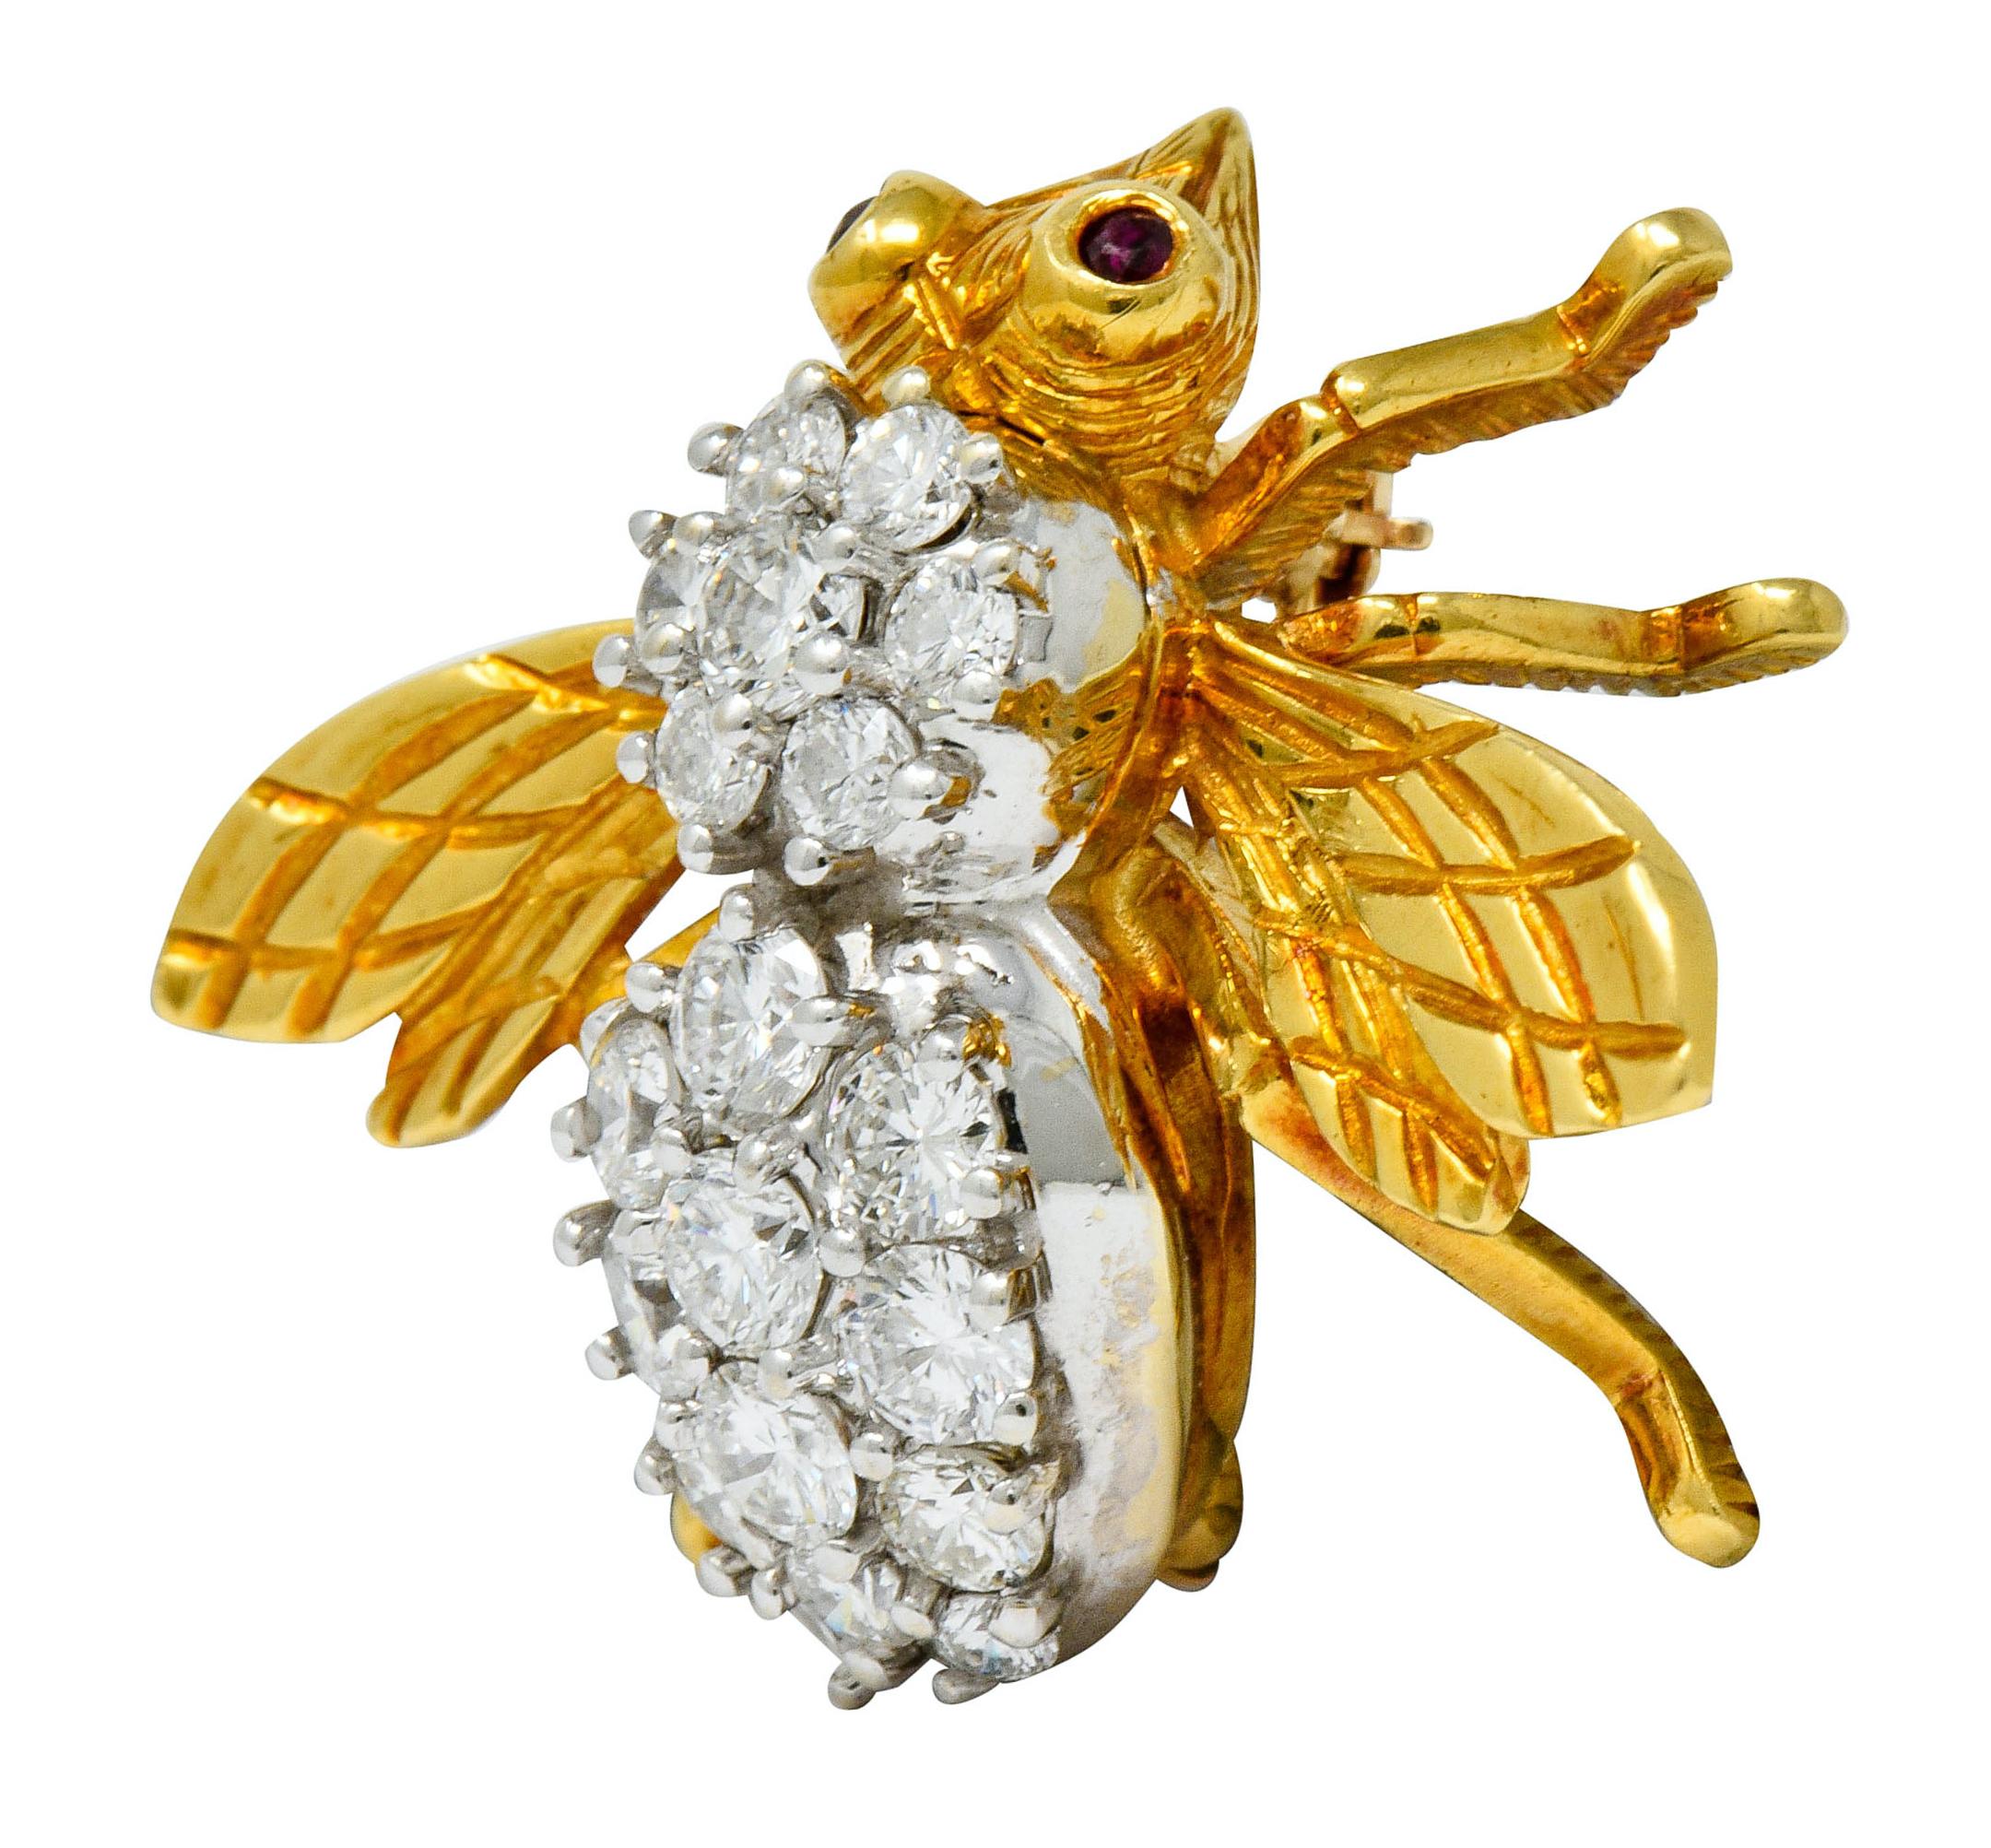 Designed as an insect with polished gold head and wings that are deeply engraved with a harlequin pattern

Round brilliant cut diamonds, set in platinum, weigh in total approximately 2.75 carats; G to I color with VS and SI clarity

Accented with